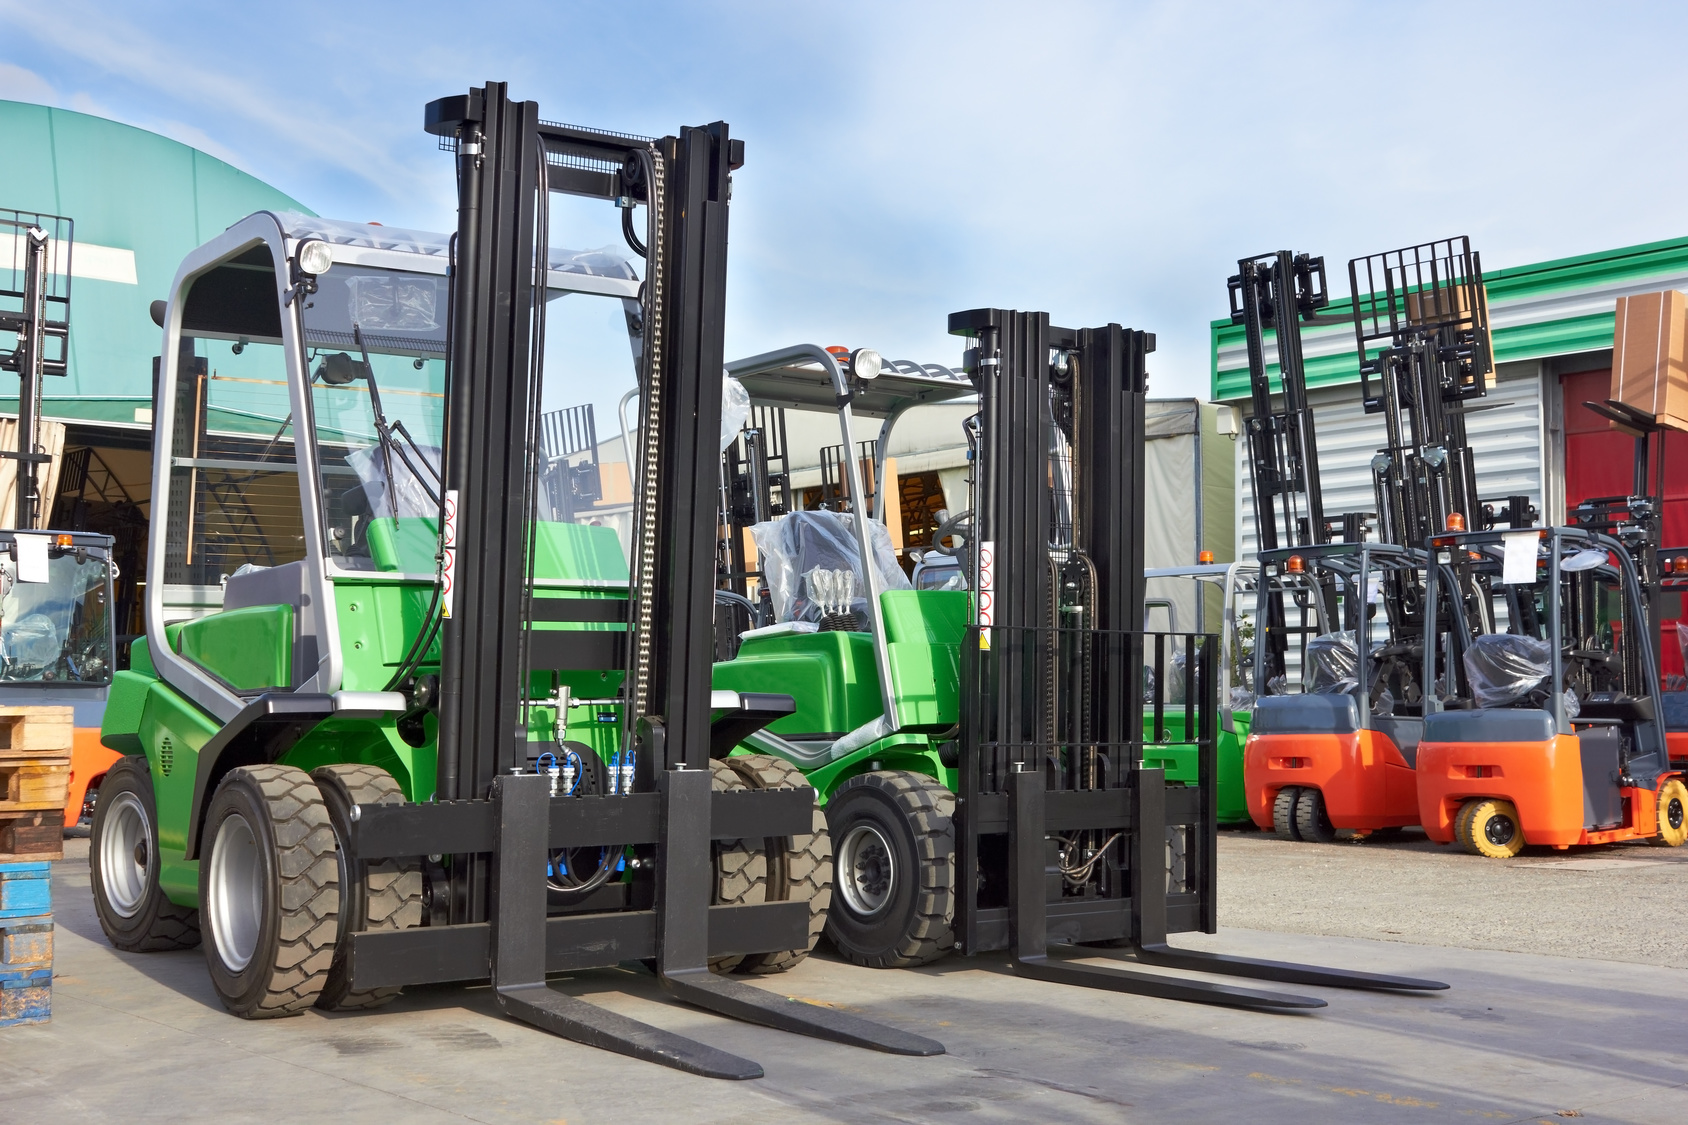 Variety of Forklifts with Differing Capacities